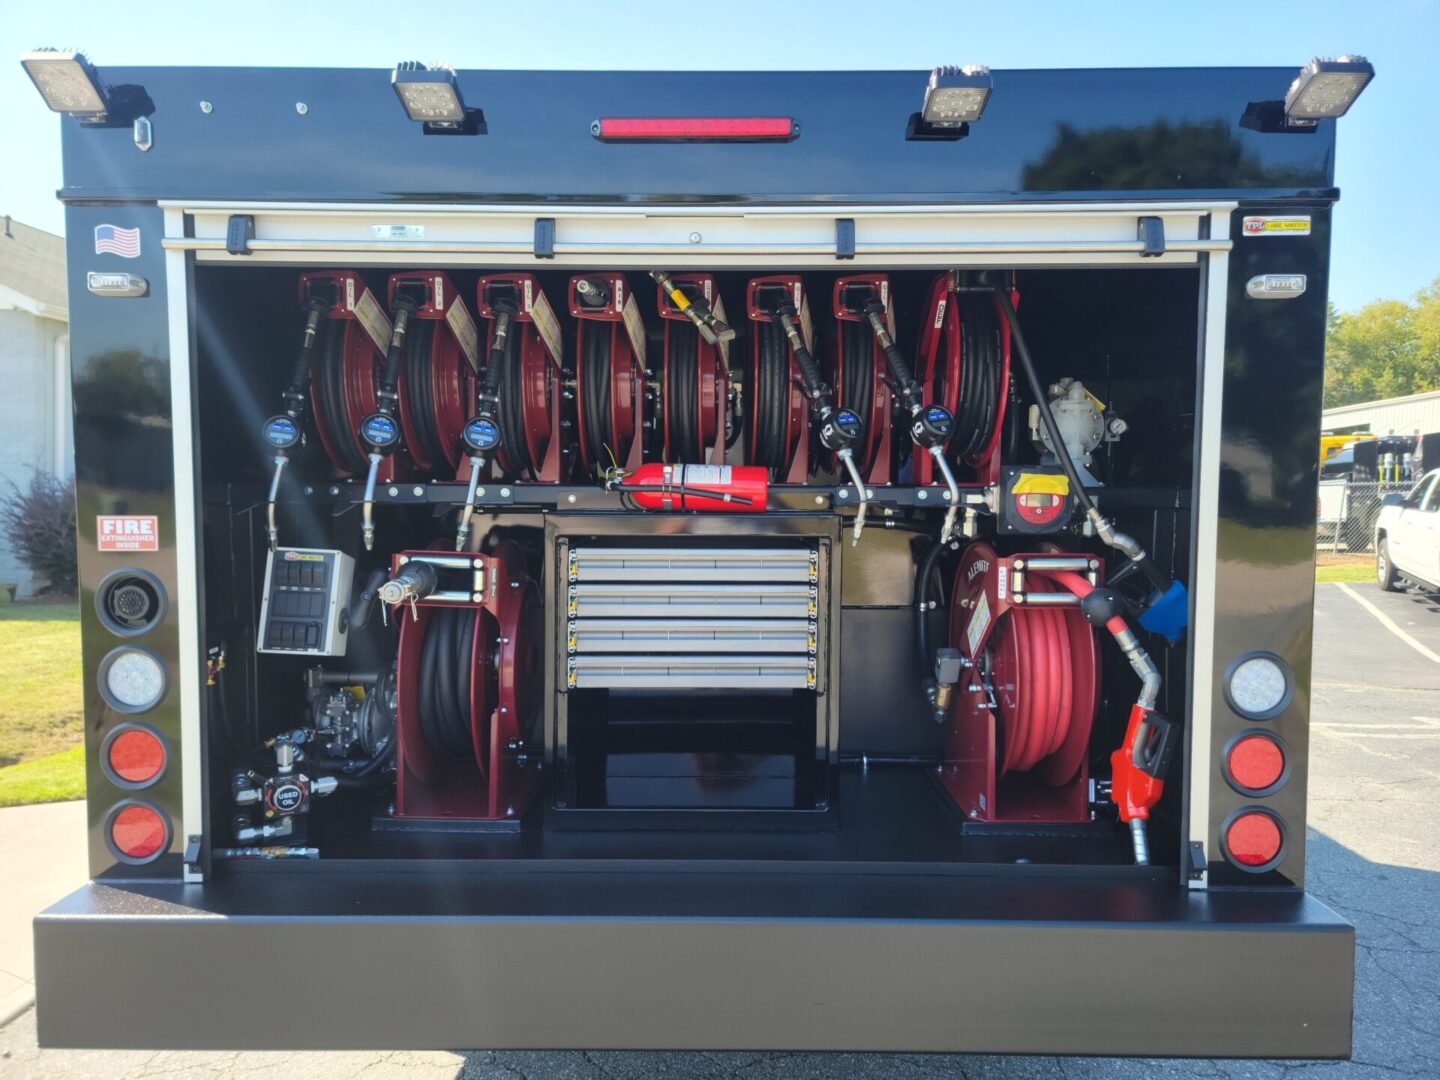 A fire truck with multiple hose racks and tools.